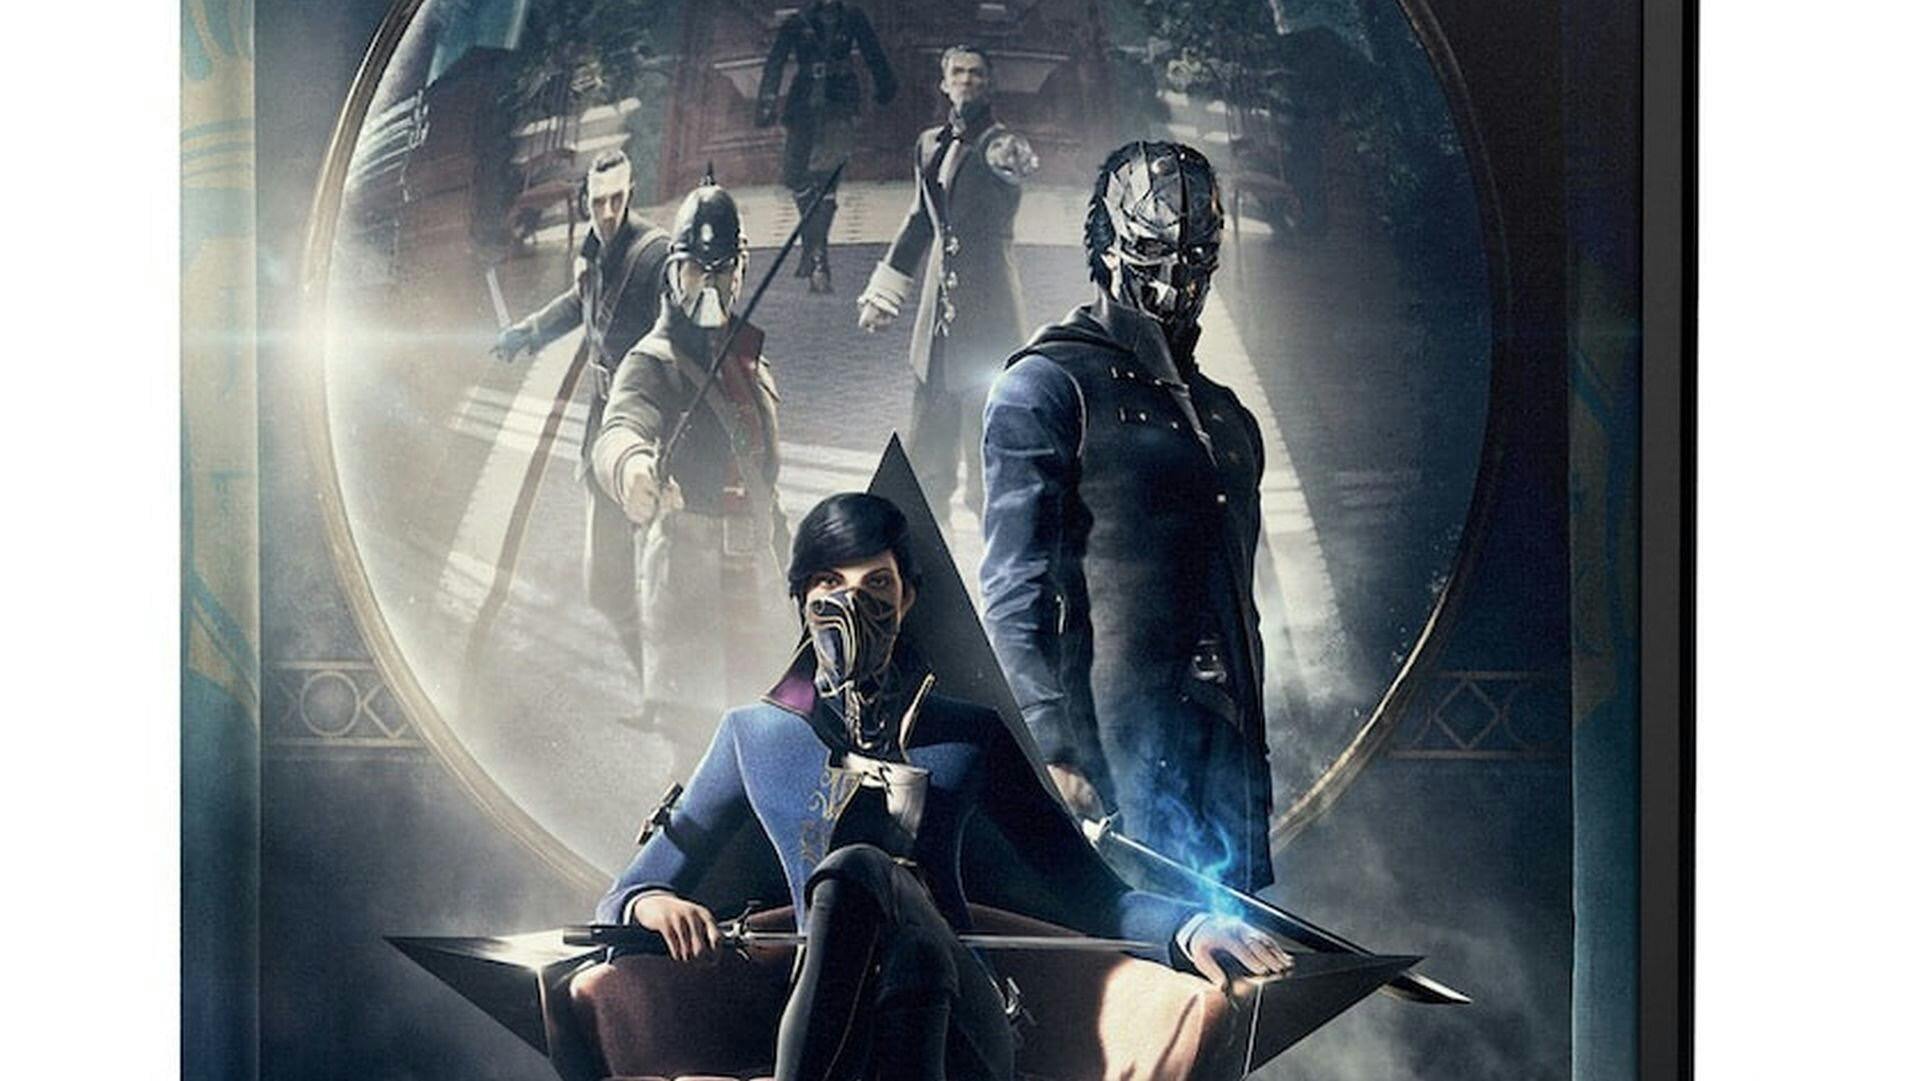 Dishonored: Adventures in Dunwall and Beyond!